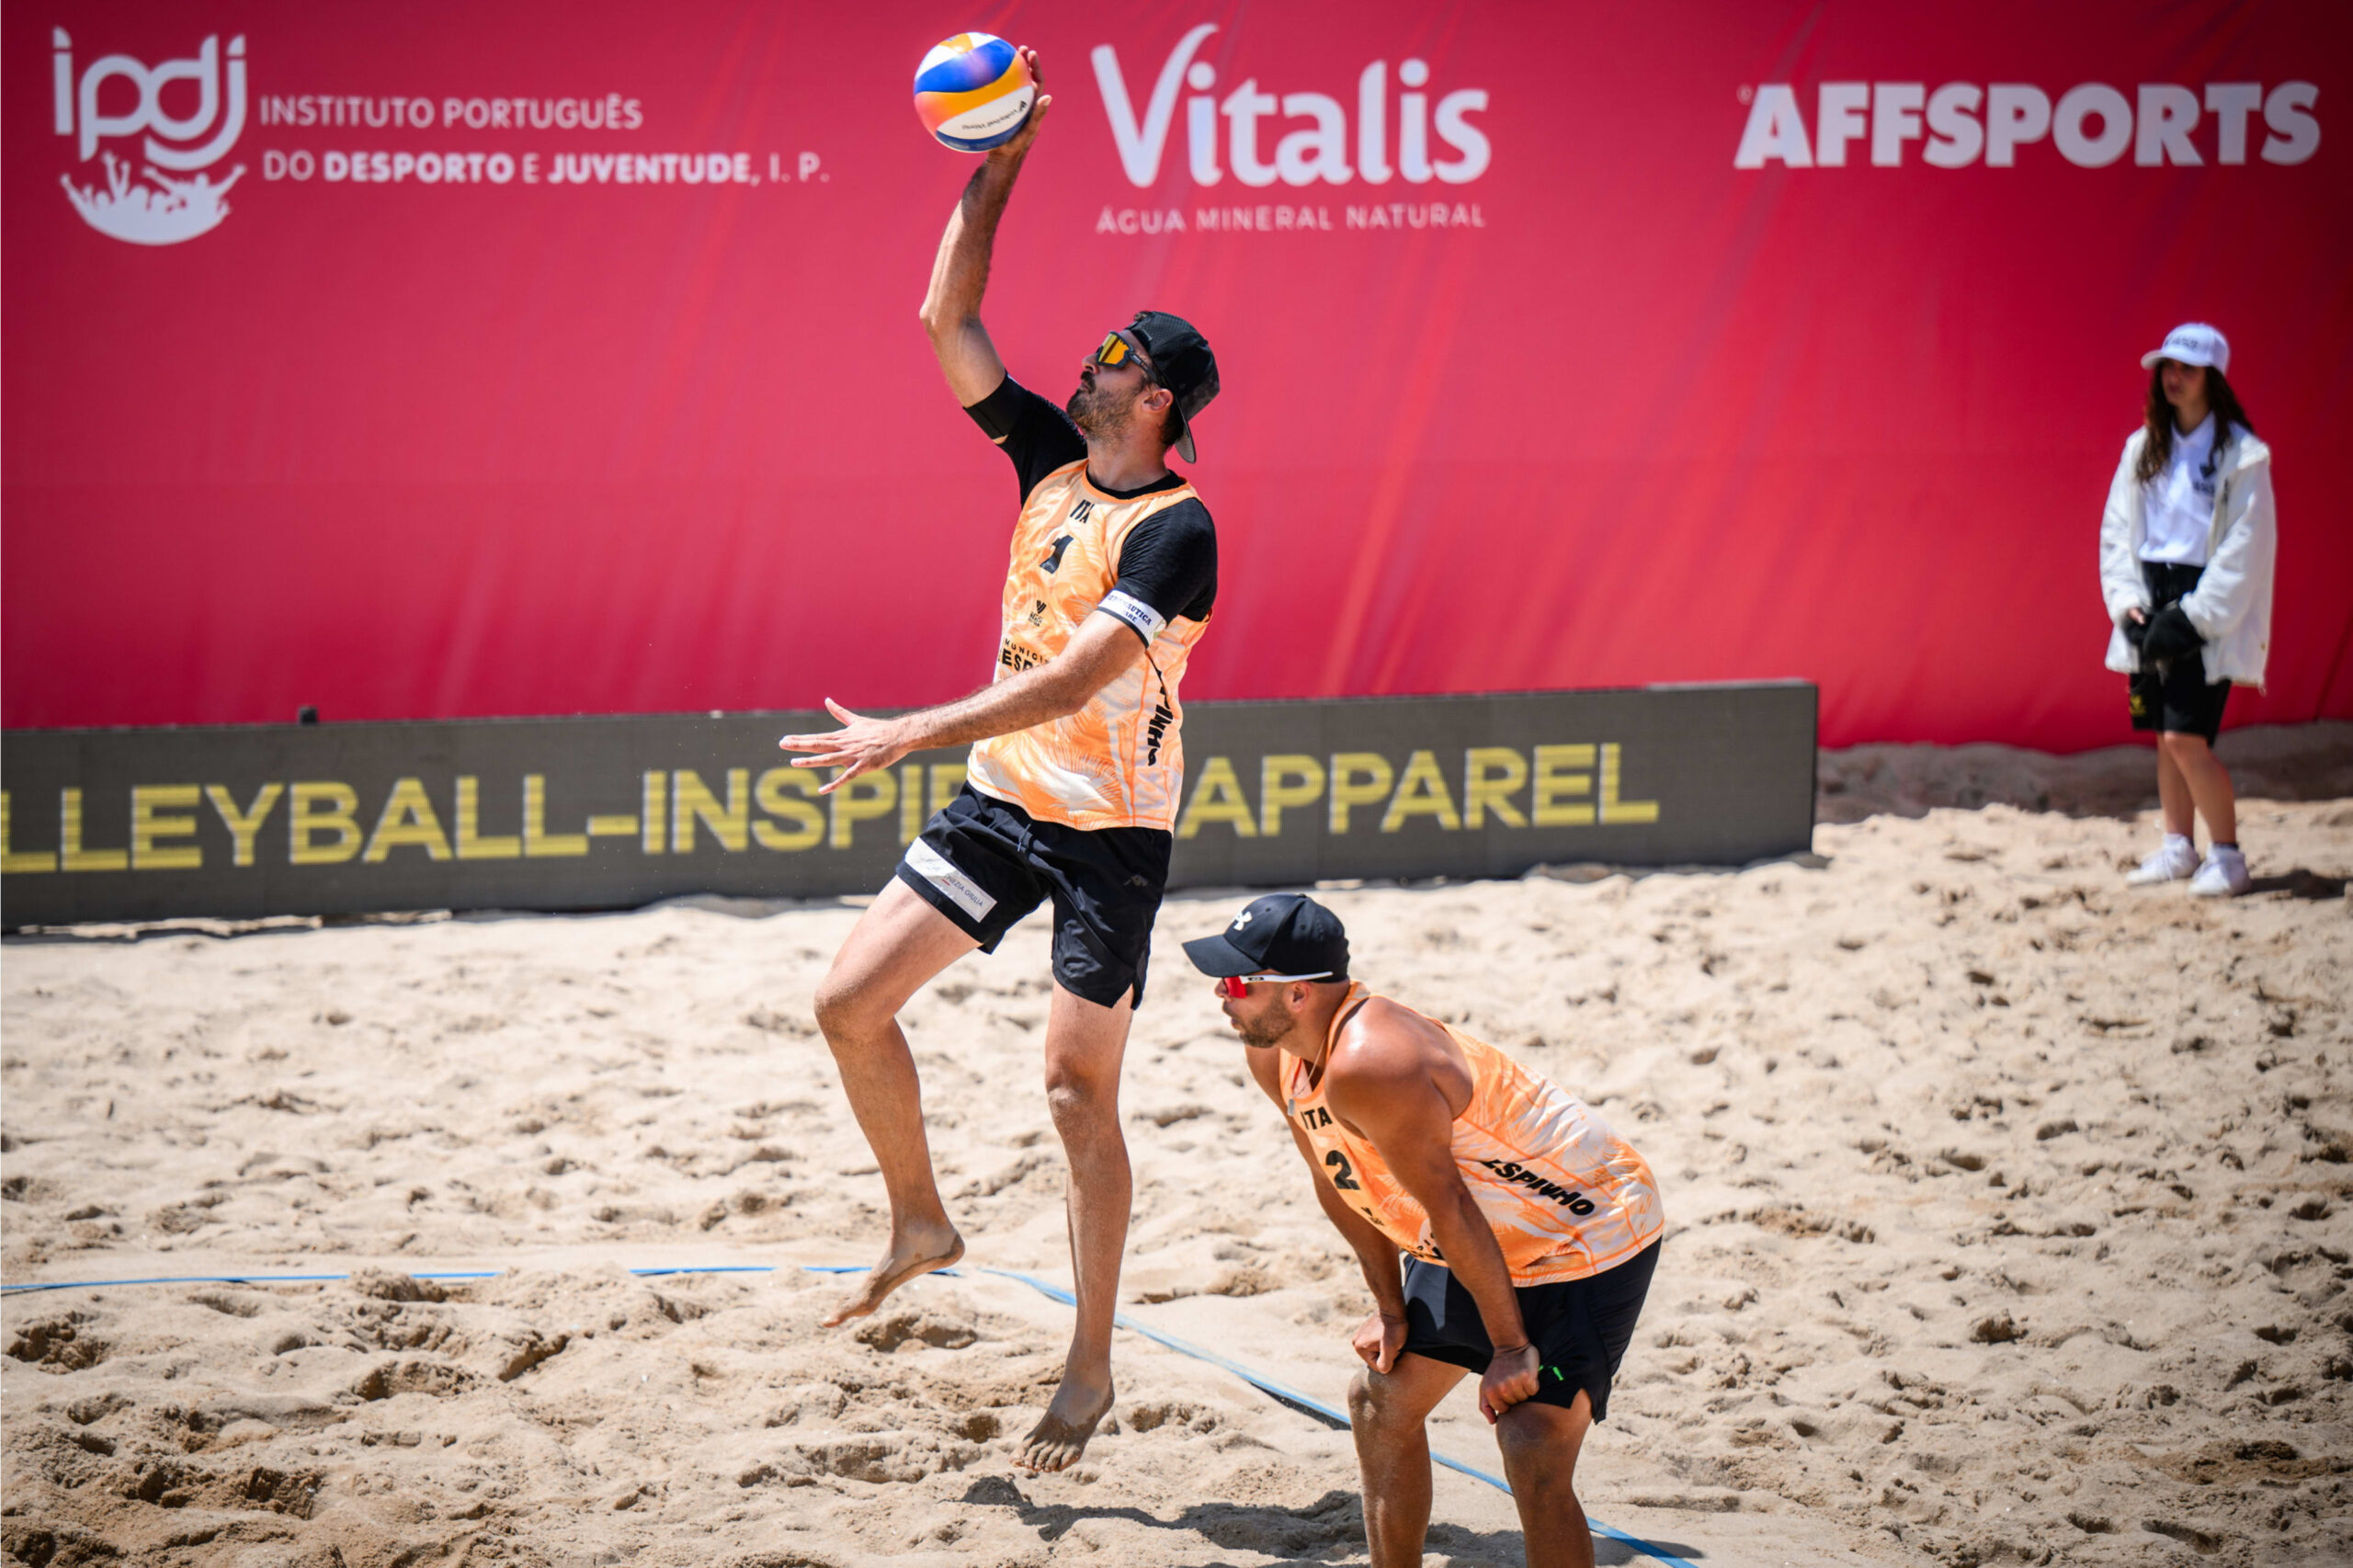 Beach volleyball, Ranghieri/Carambula rapidly exited Espinho.  Two pairs in the principle event within the Portuguese Elite 16